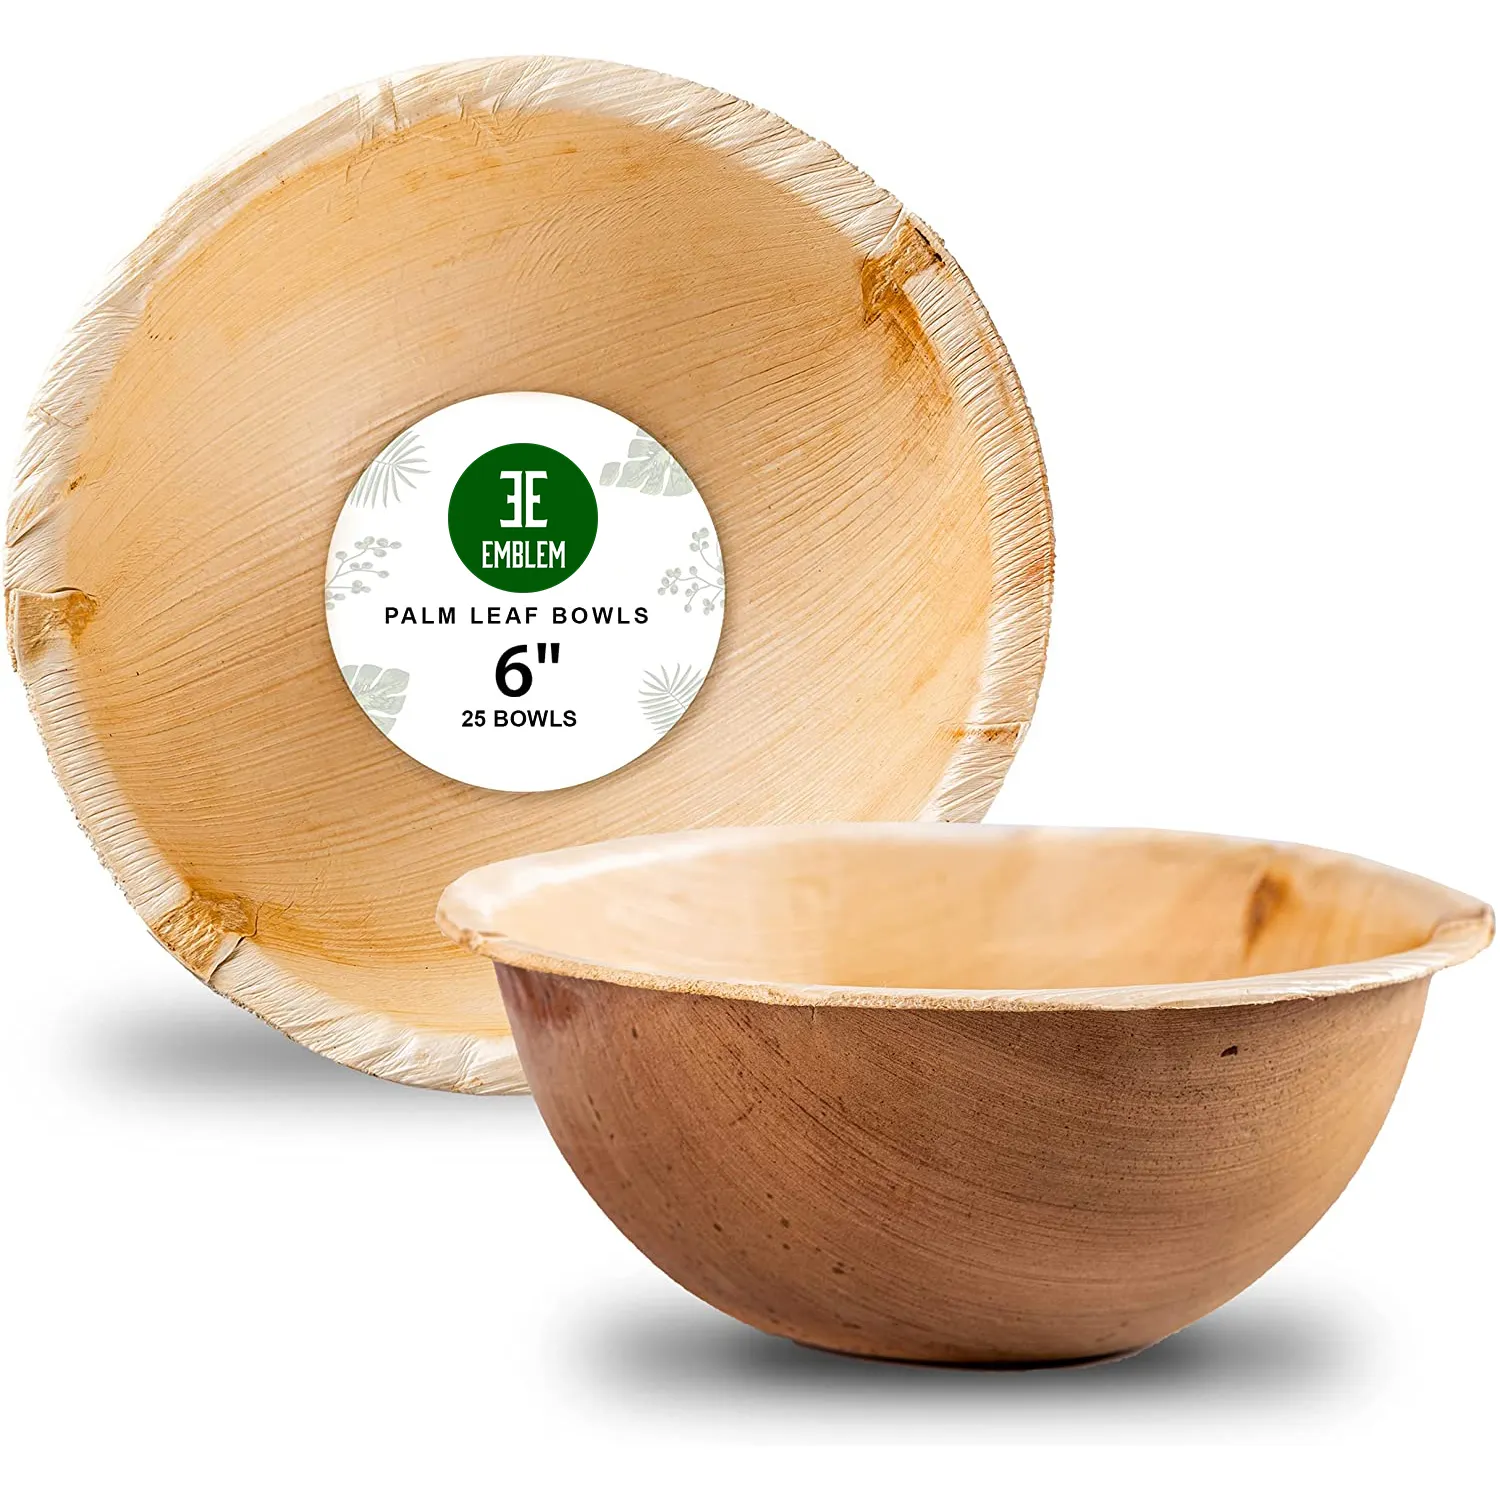 Palm Leaf Bowls Disposable Bamboo Bowls Like 6 Inch Round Deep 15 oz (25 pc)